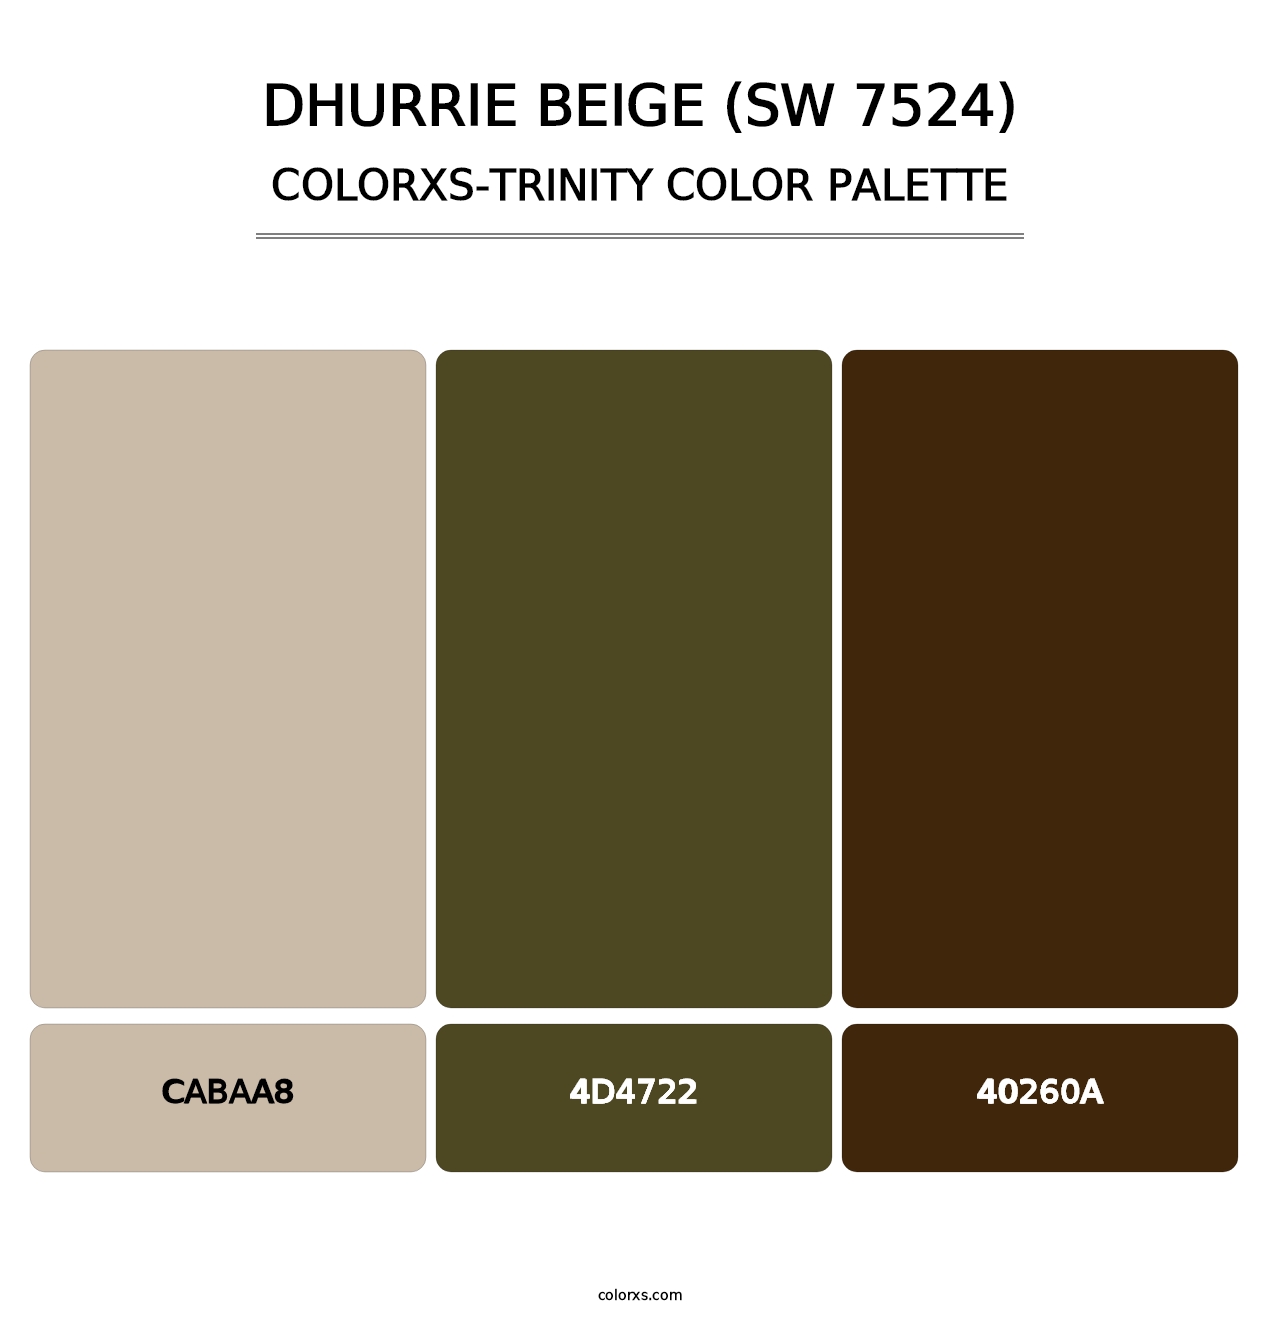 Dhurrie Beige (SW 7524) - Colorxs Trinity Palette